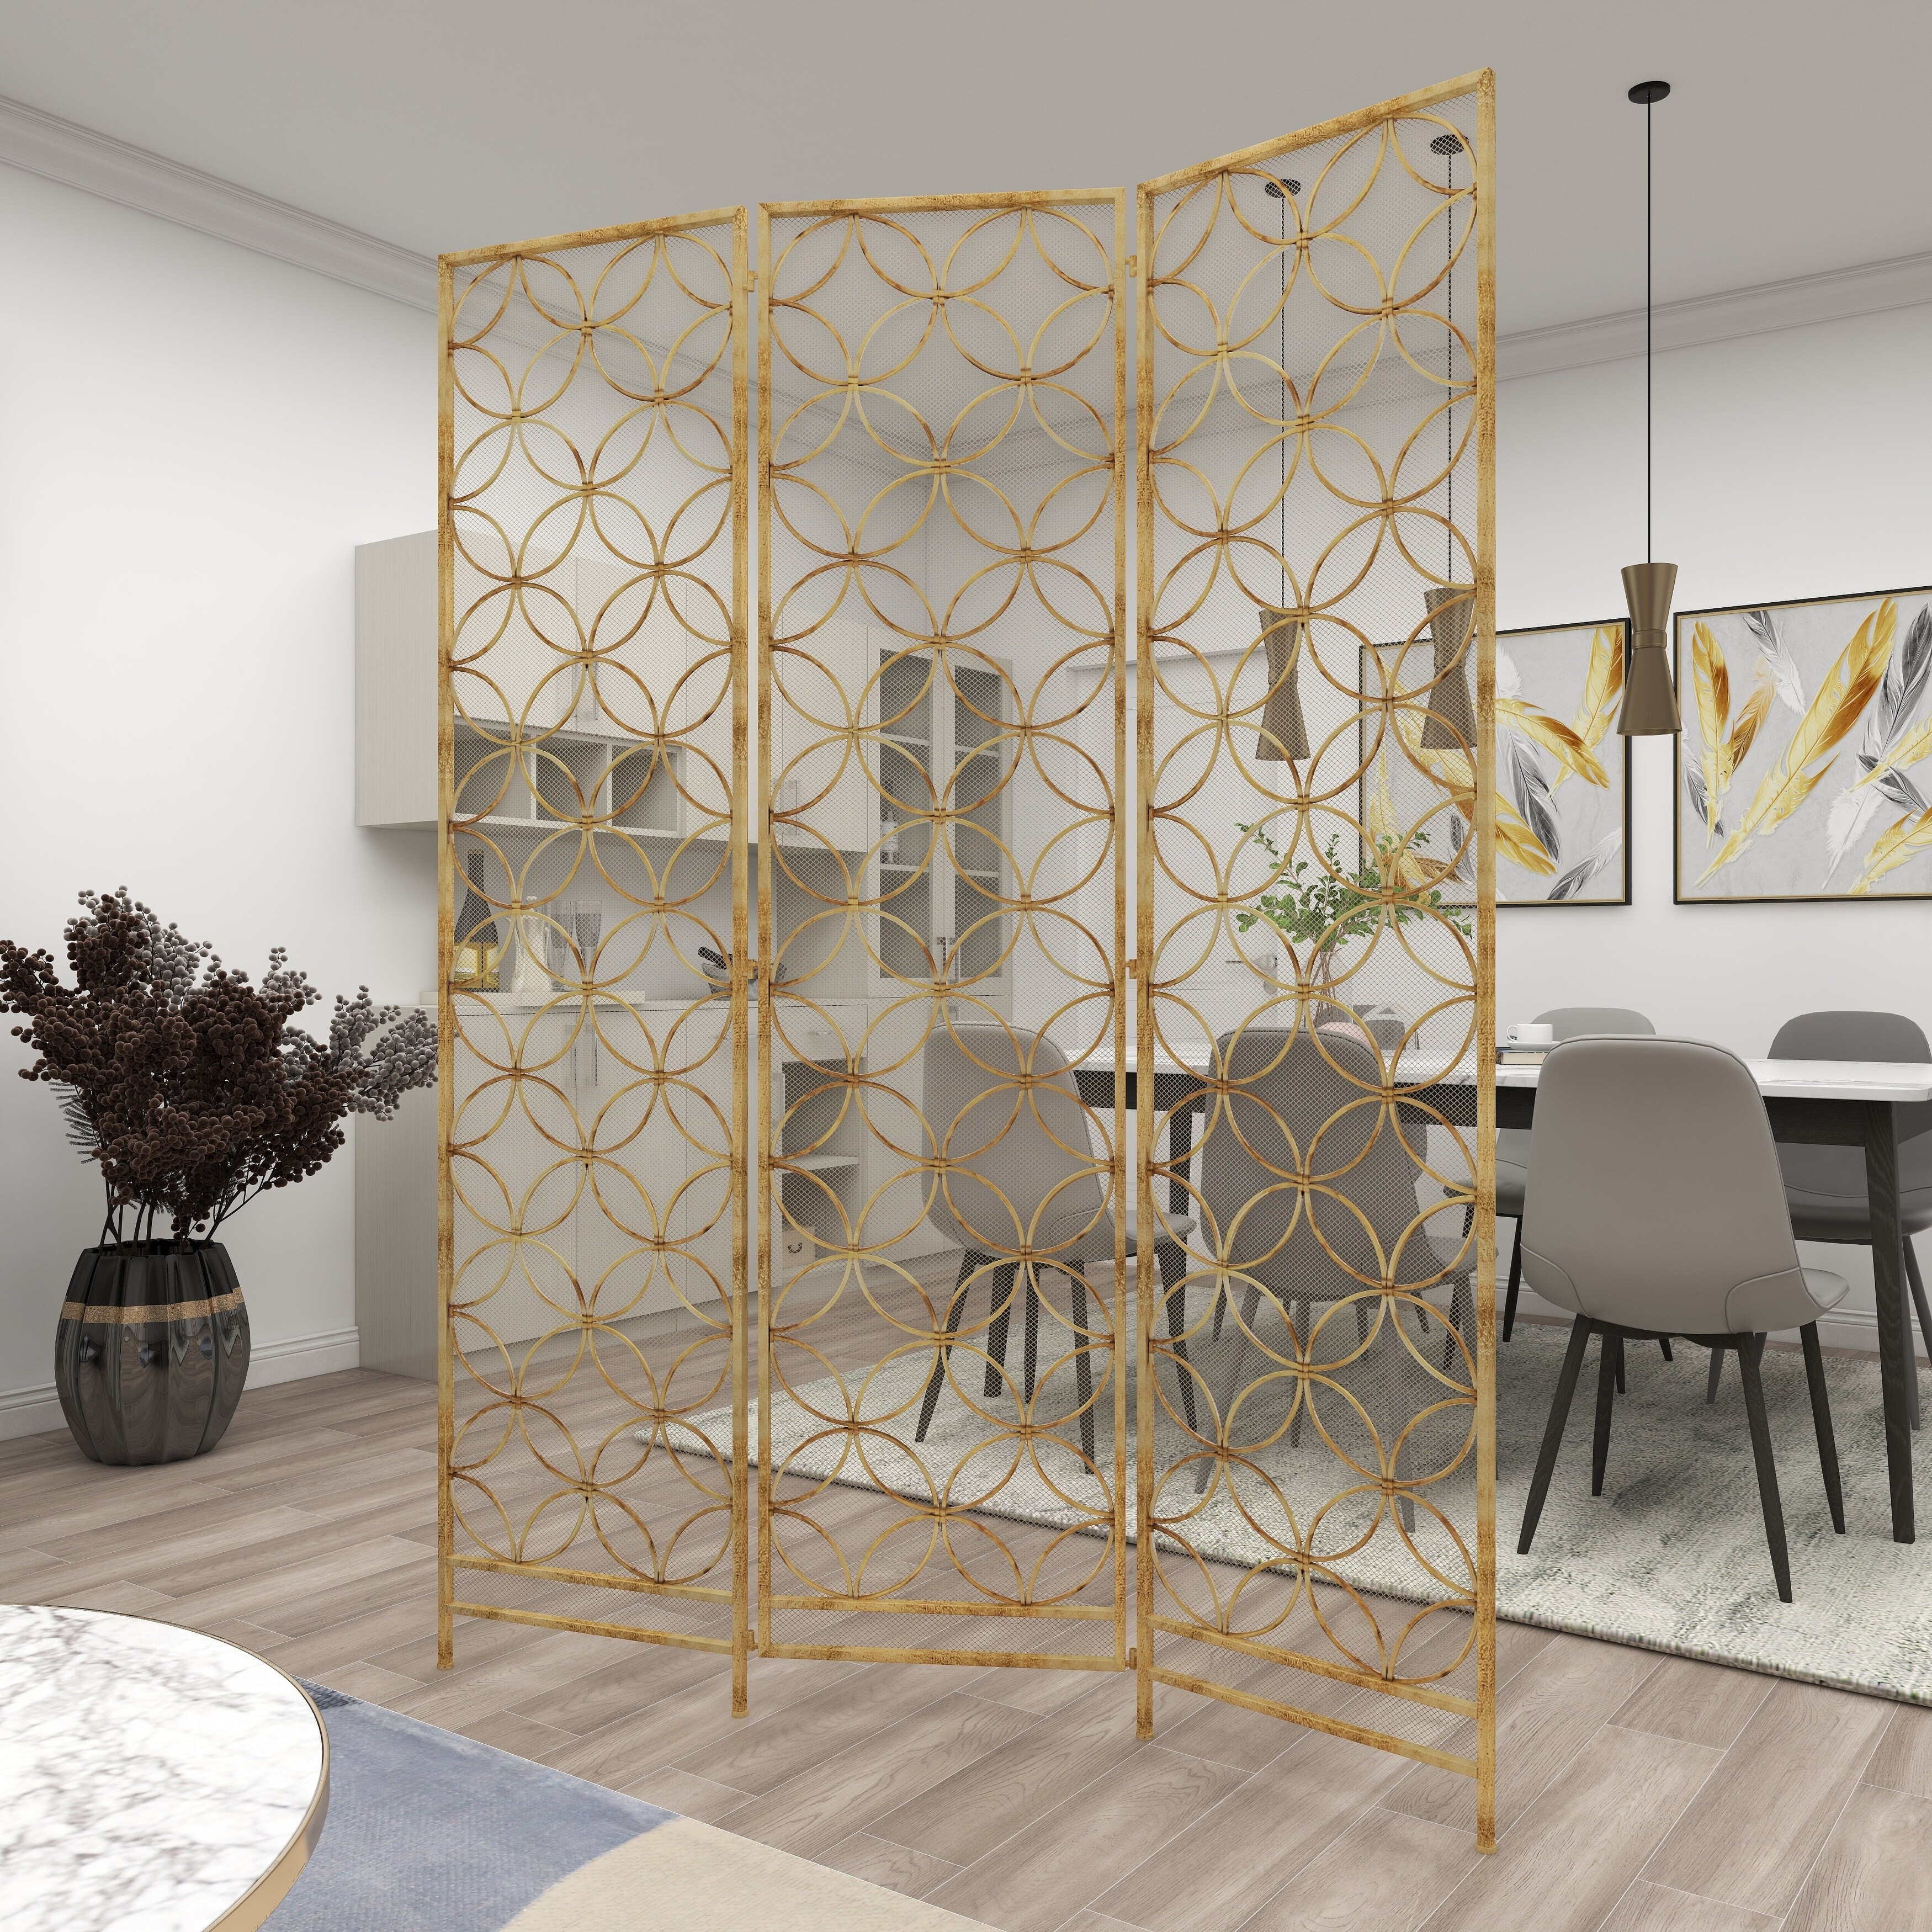 https://ak1.ostkcdn.com/images/products/is/images/direct/fc90ceed09a57358211391d179c7a57b30744614/Brass-Iron-Modern-Room-Divider-Screen-79-x-57-x-1.jpg